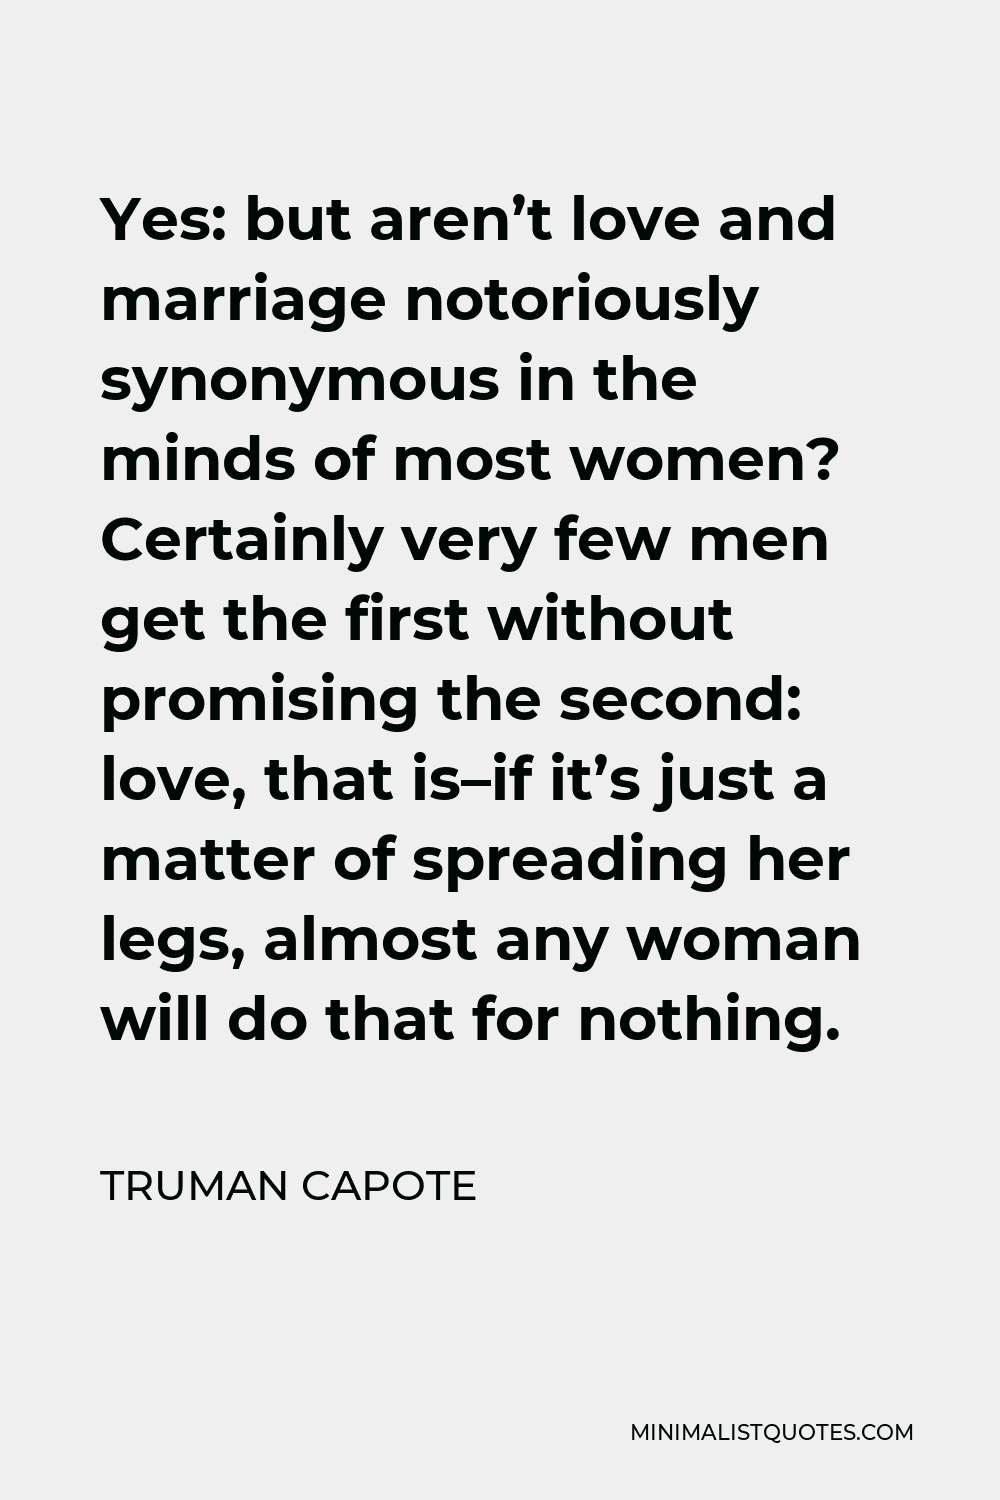 Truman Capote Quote - Yes: but aren’t love and marriage notoriously synonymous in the minds of most women? Certainly very few men get the first without promising the second: love, that is–if it’s just a matter of spreading her legs, almost any woman will do that for nothing.